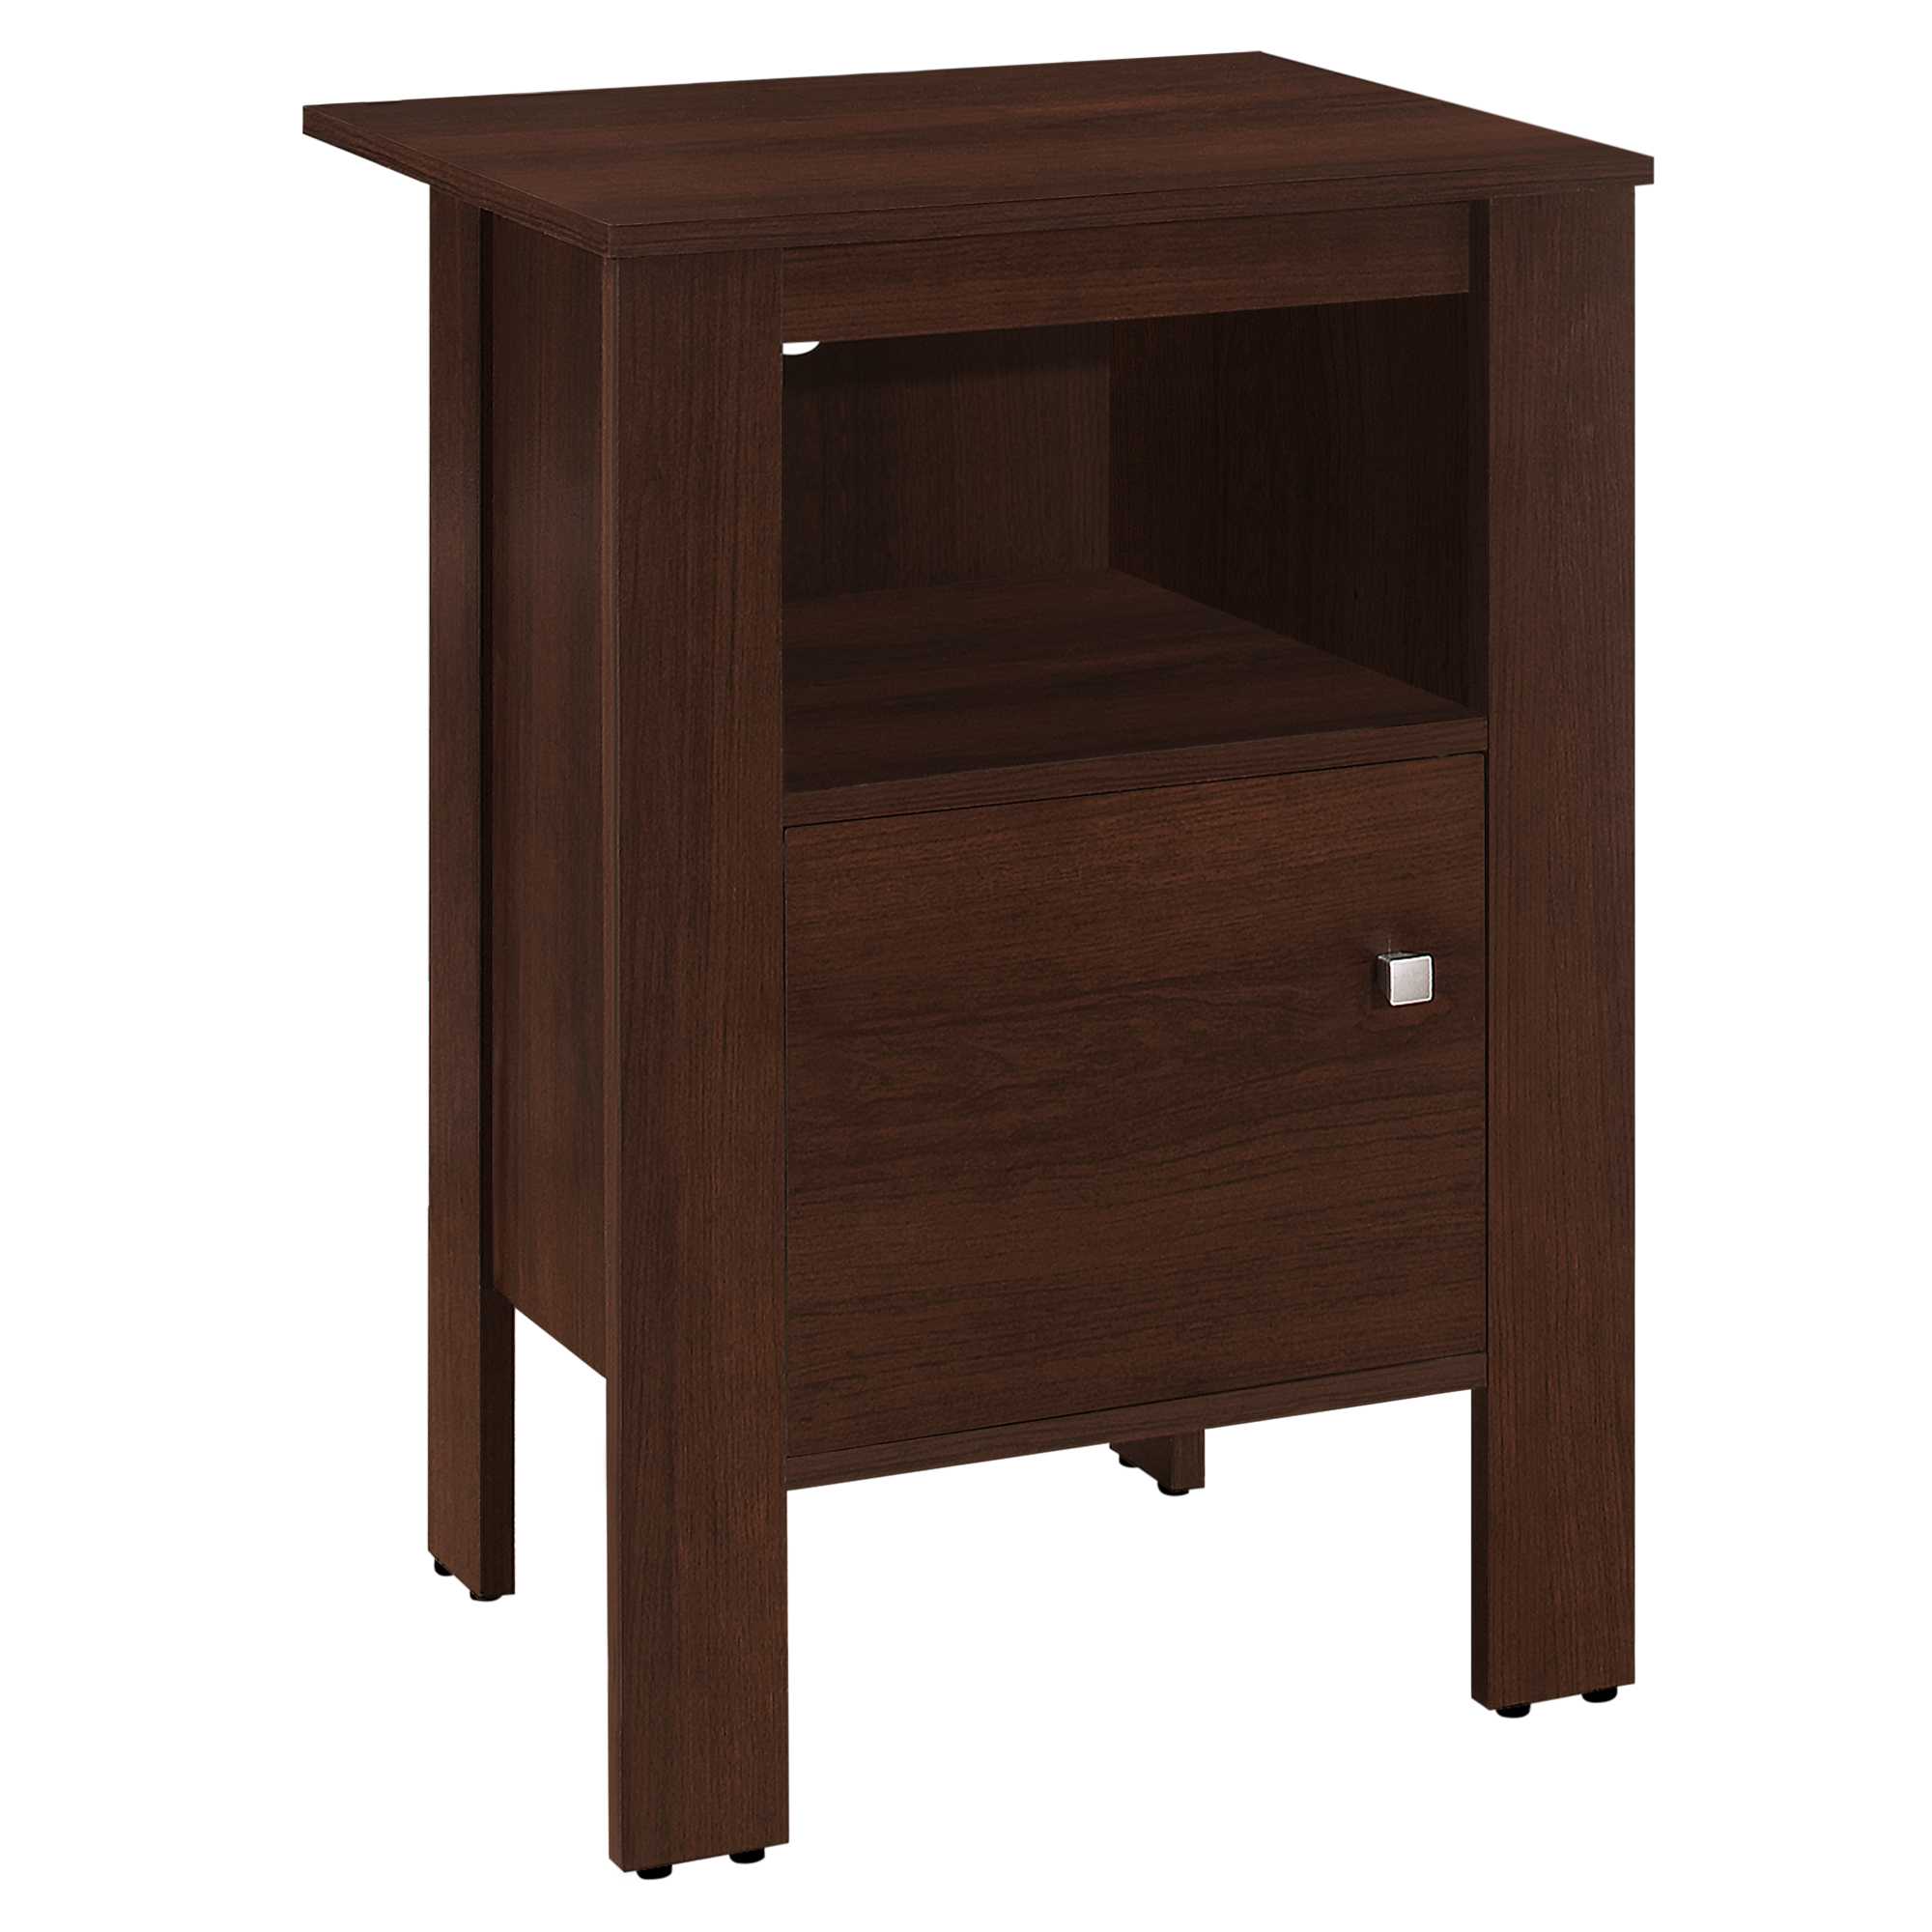 14" x 17.25" x 24.25" Cherry Particle Board Storage Accent Table